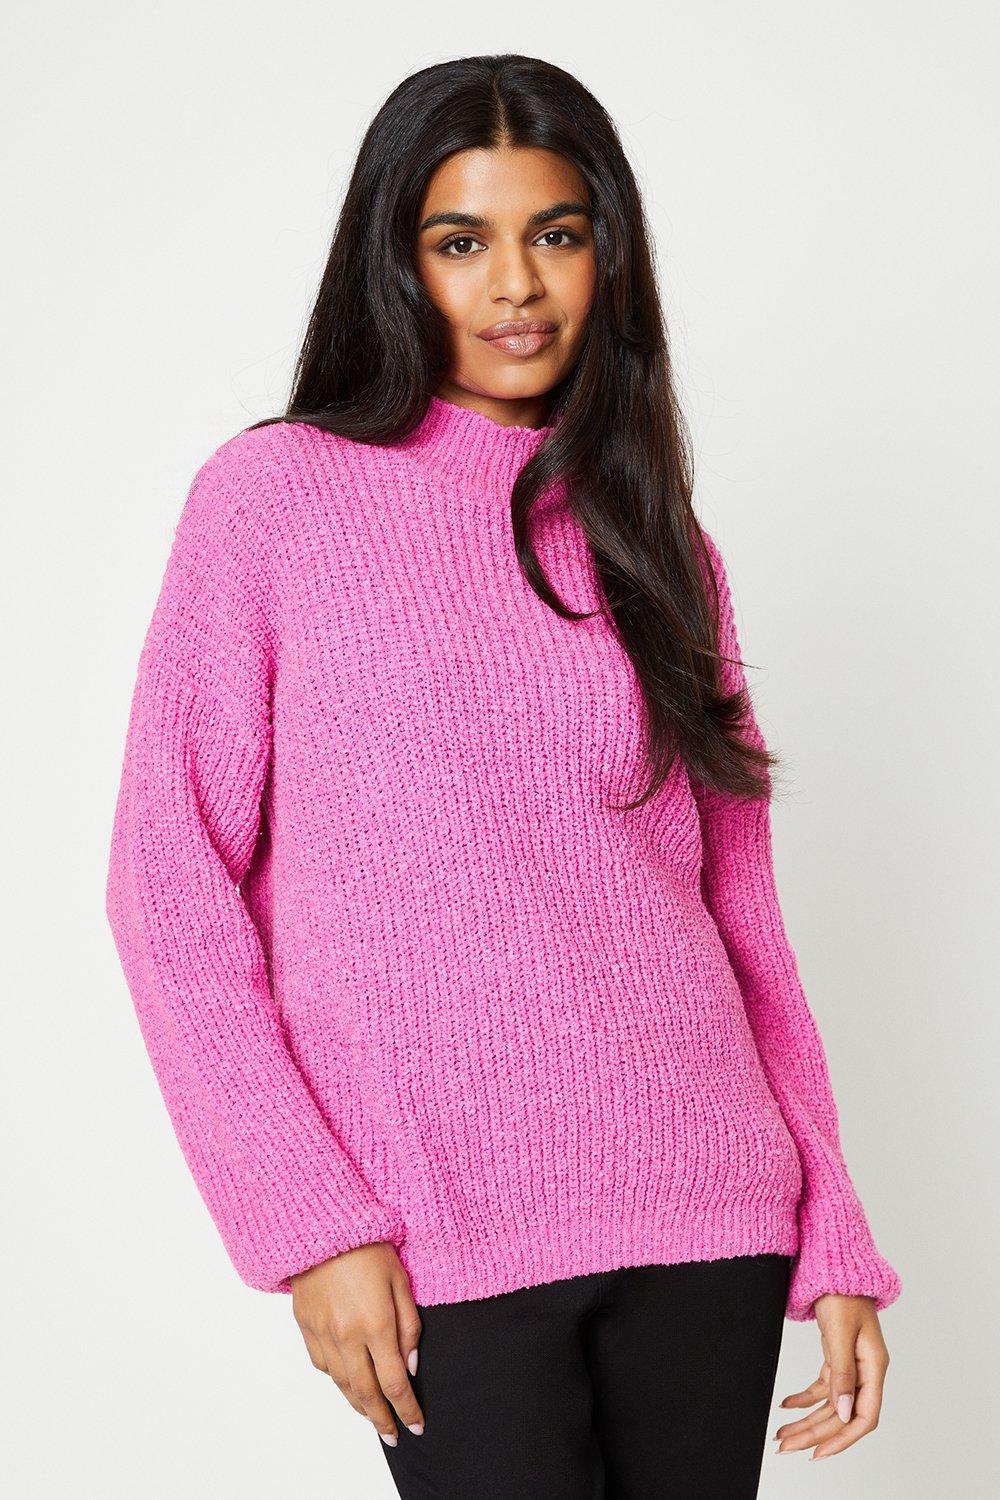 Women’s Petite Boucle Slouchy High Neck Jumper - pink - S